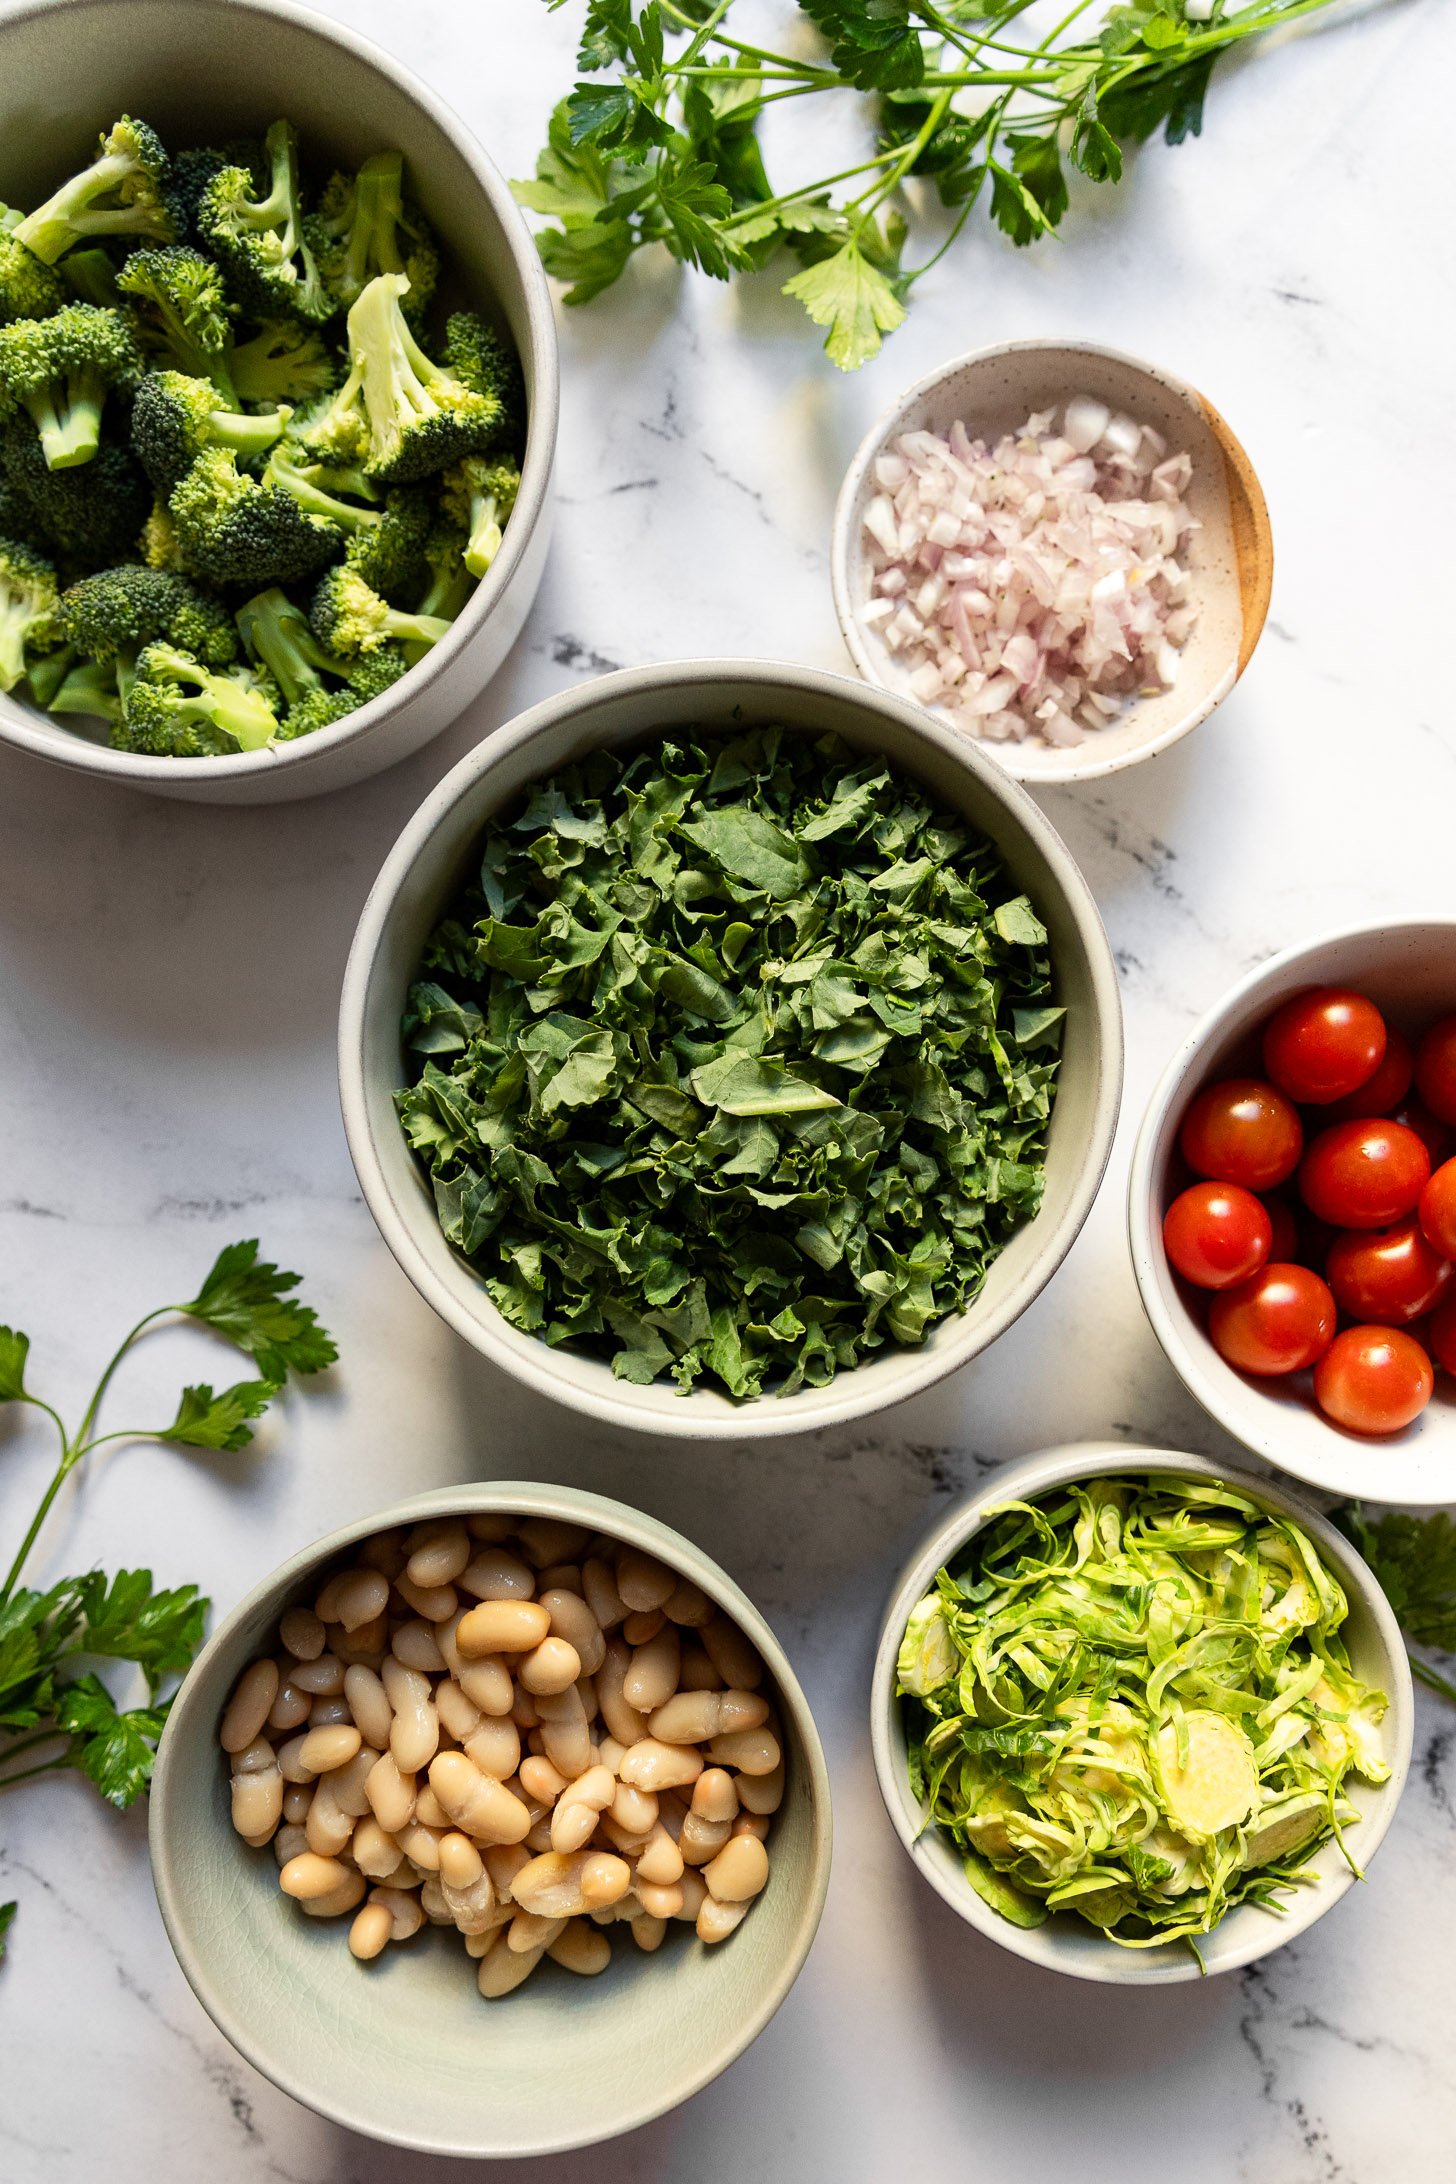 Kale, broccoli, brussels, white beans, tomatoes, and shallot in bowls.